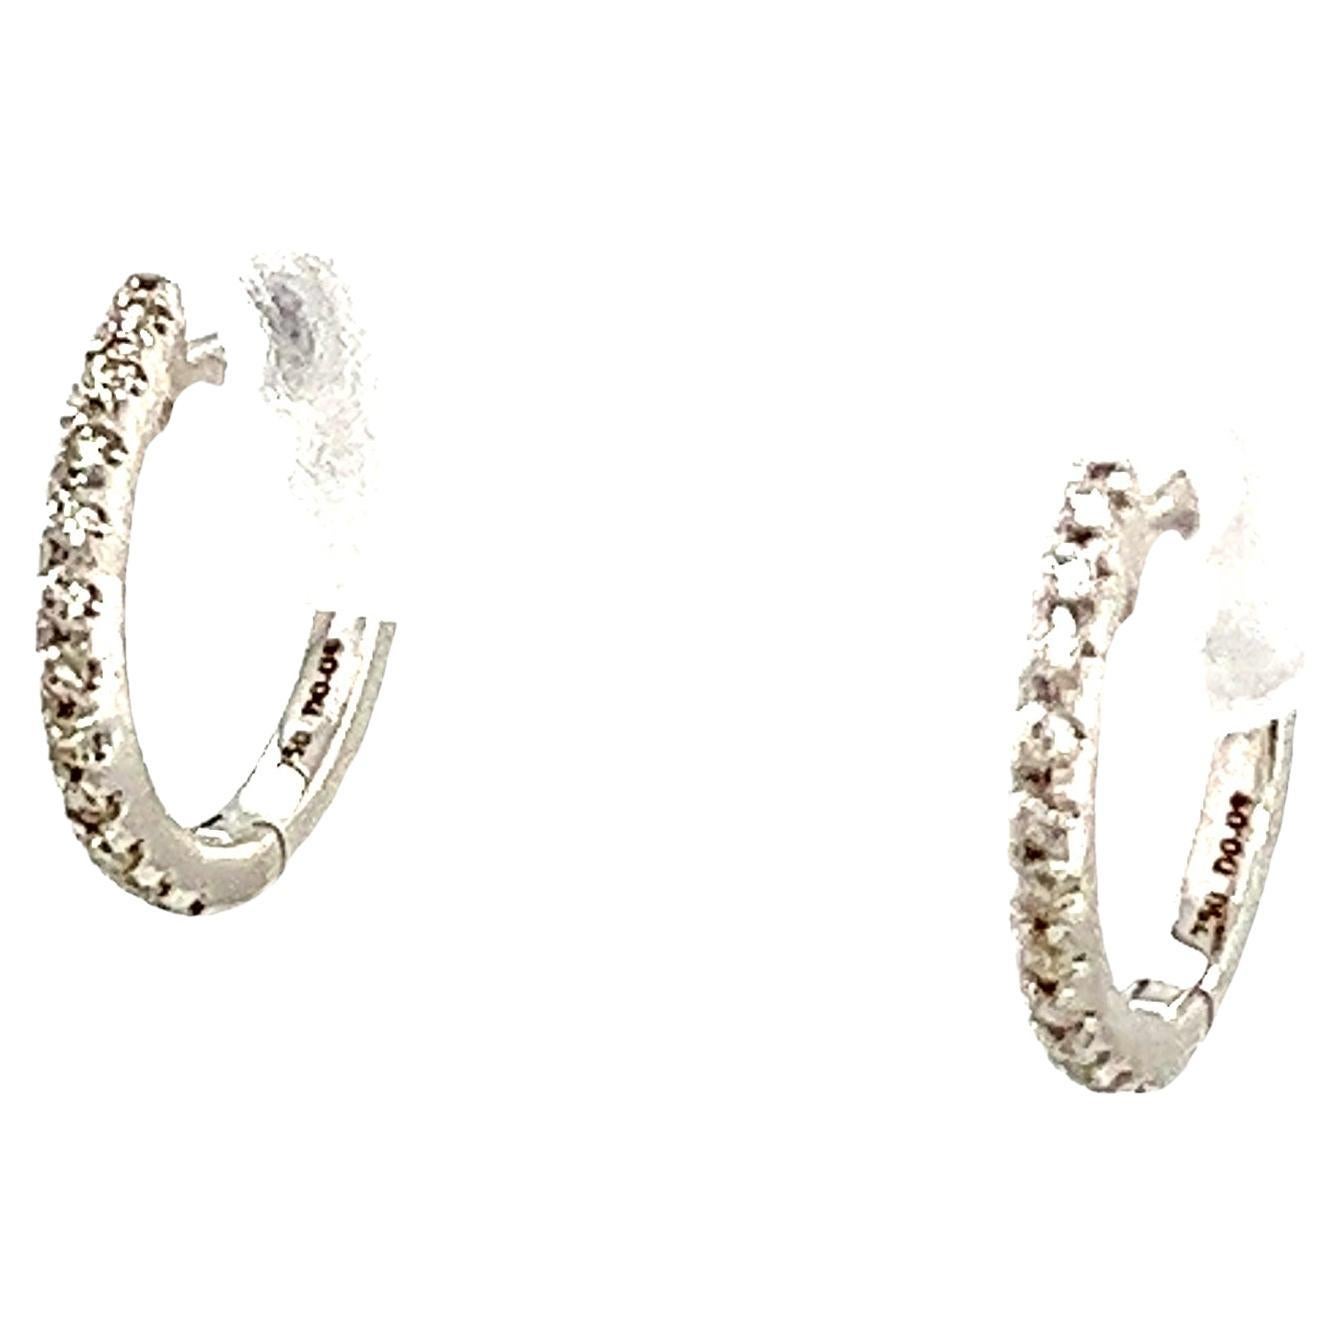 18ct White Gold Diamond Hoop Earrings, Set With 0.09ct Of Round Diamonds, 11mm